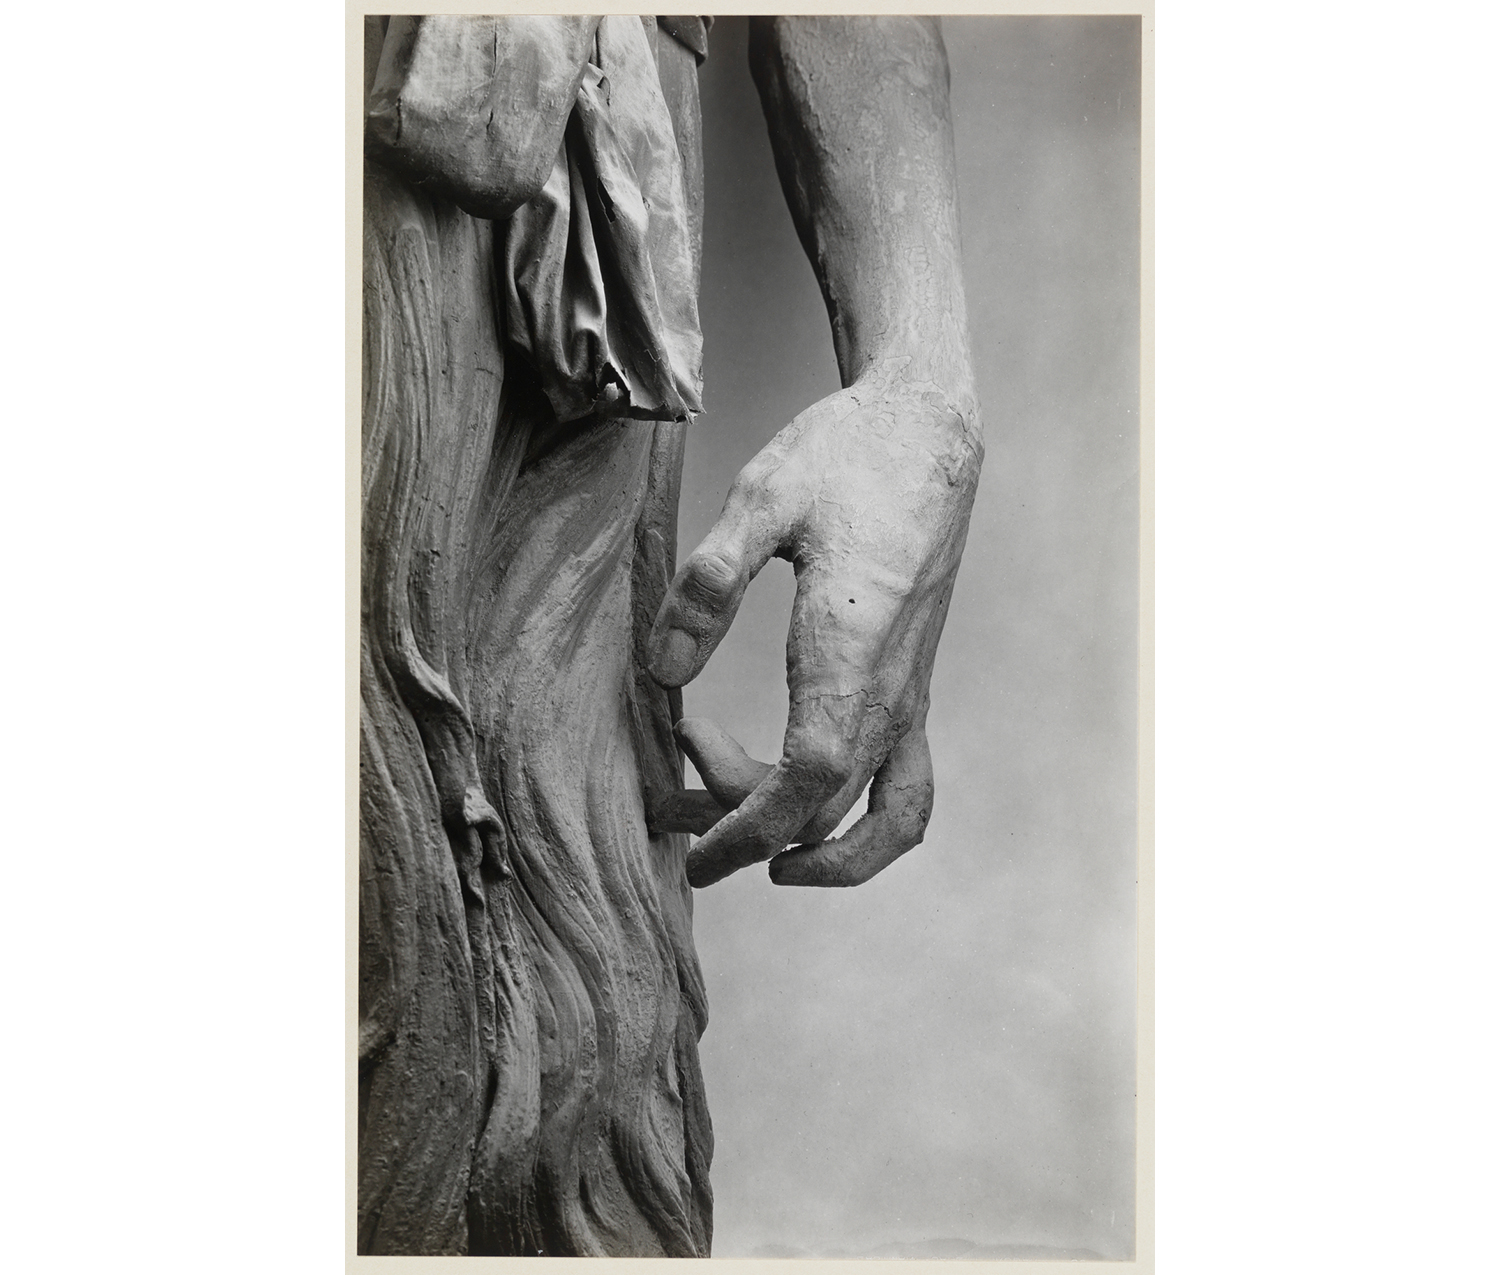 close-up of a hand of a sculpture with its fingers clenched slightly inwards